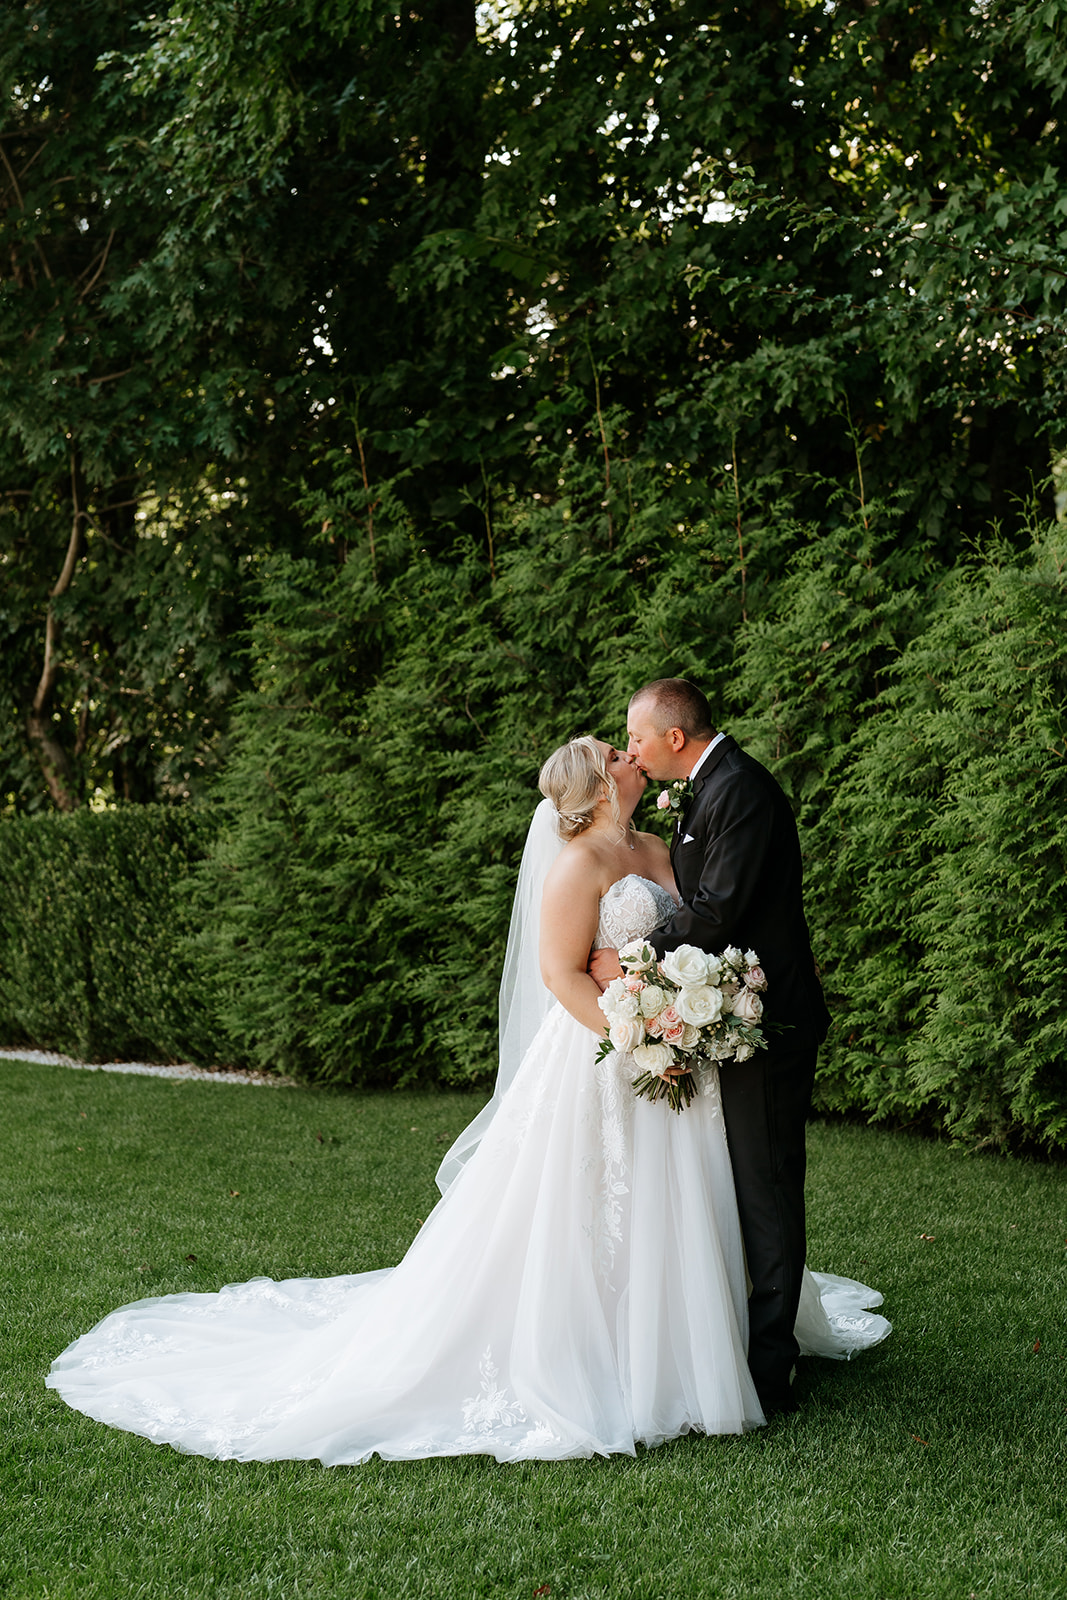 A bride and groom sharing their first look at Lakeview Pavilion in an outdoor setting with tall hedge trees in the background. 